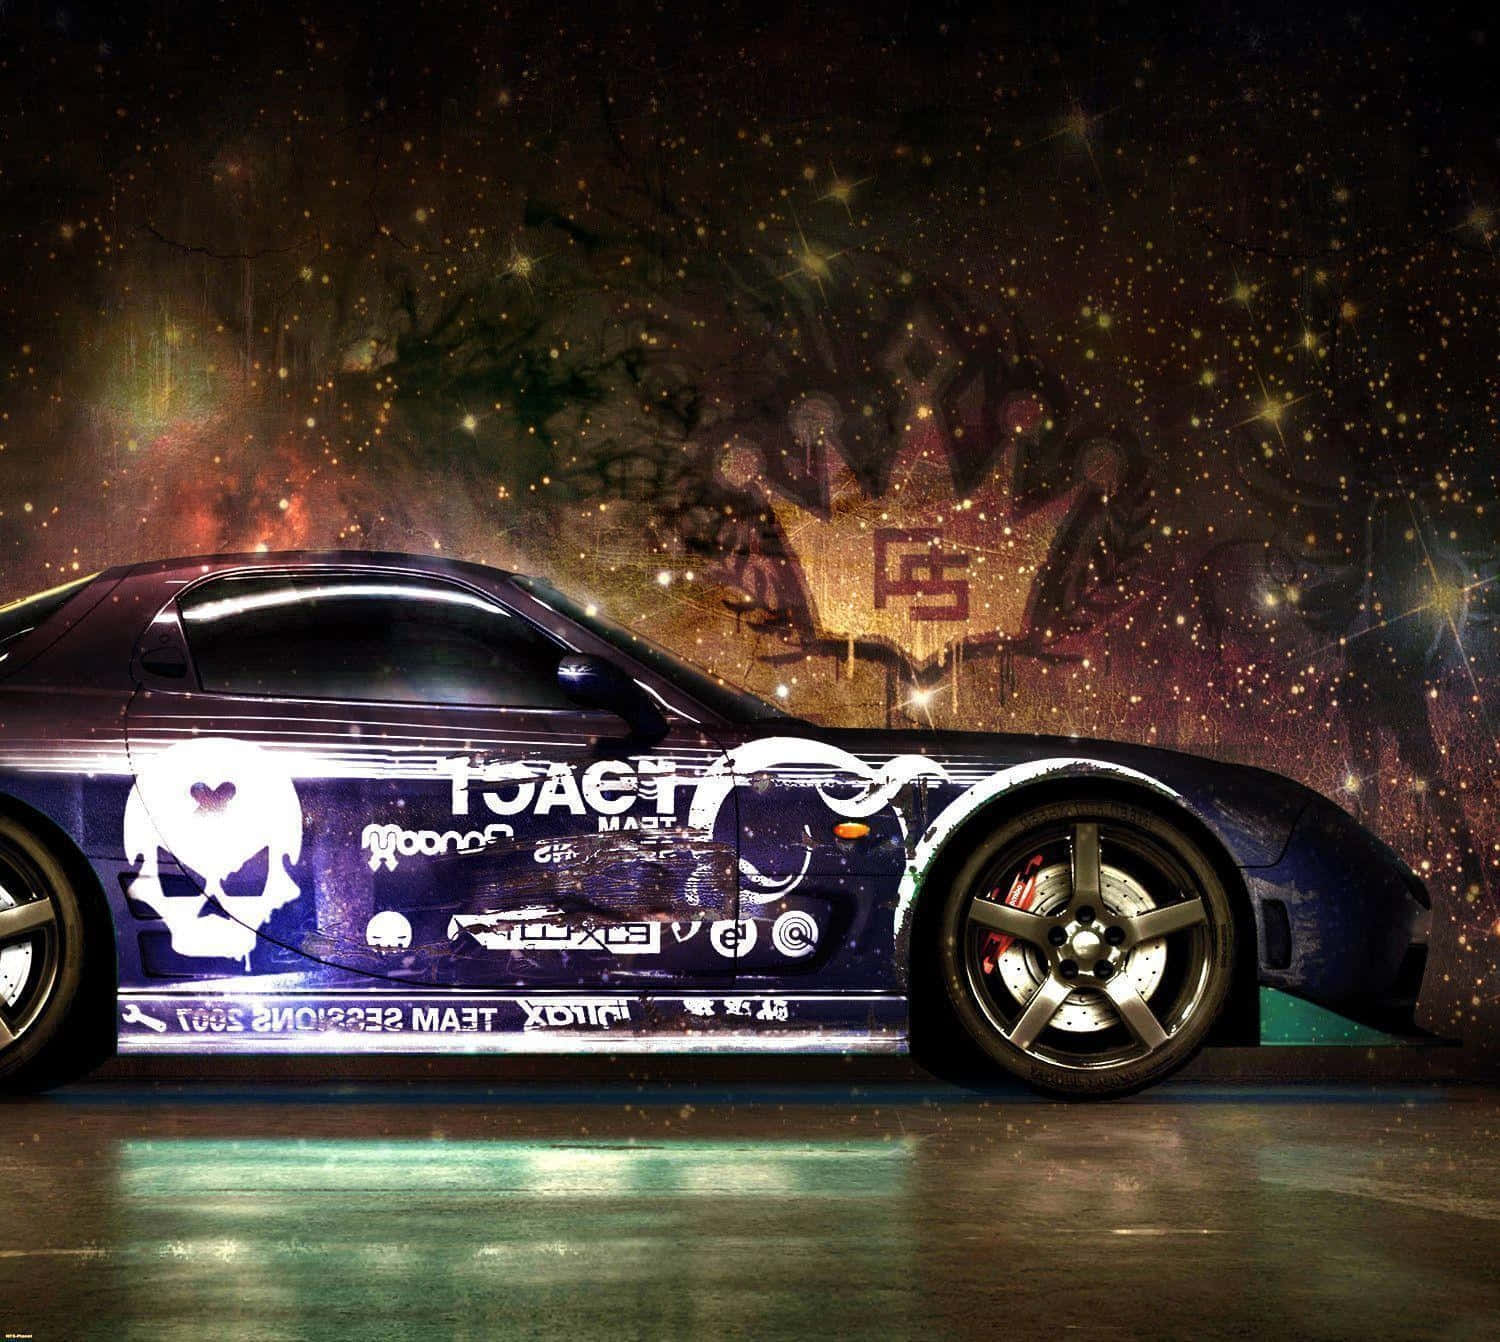 Tag gaden i Need for Speed. Wallpaper